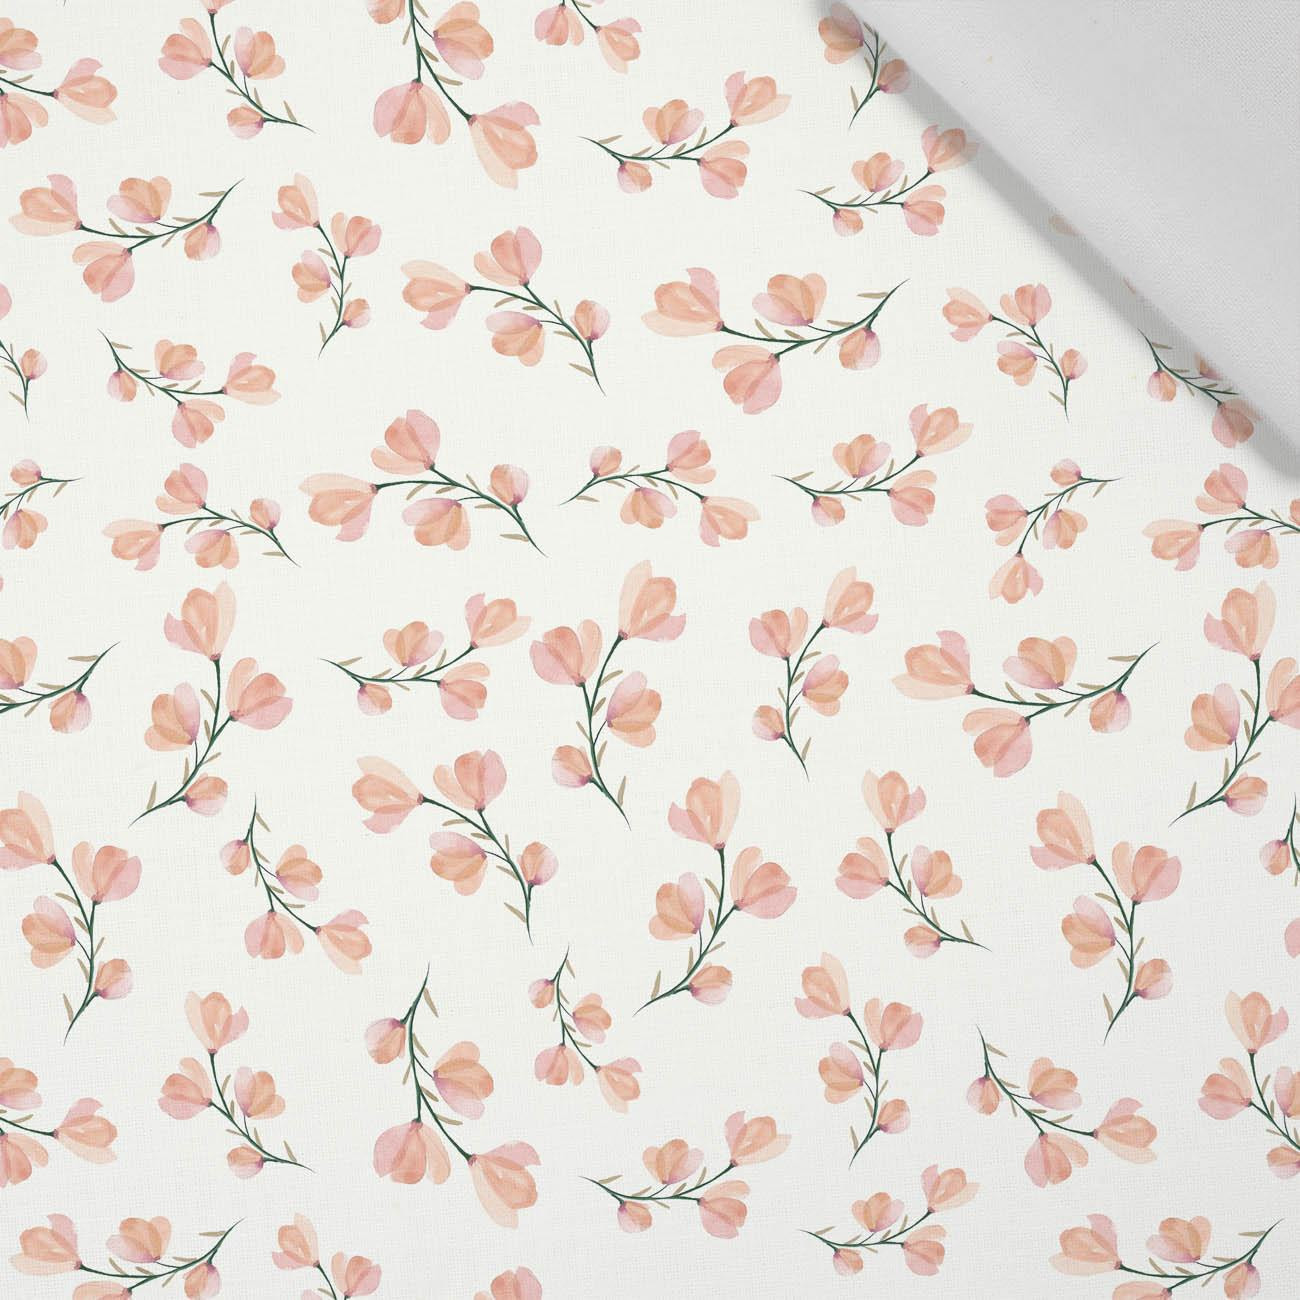 PINK FLOWERS PAT. 4 / white - Cotton woven fabric